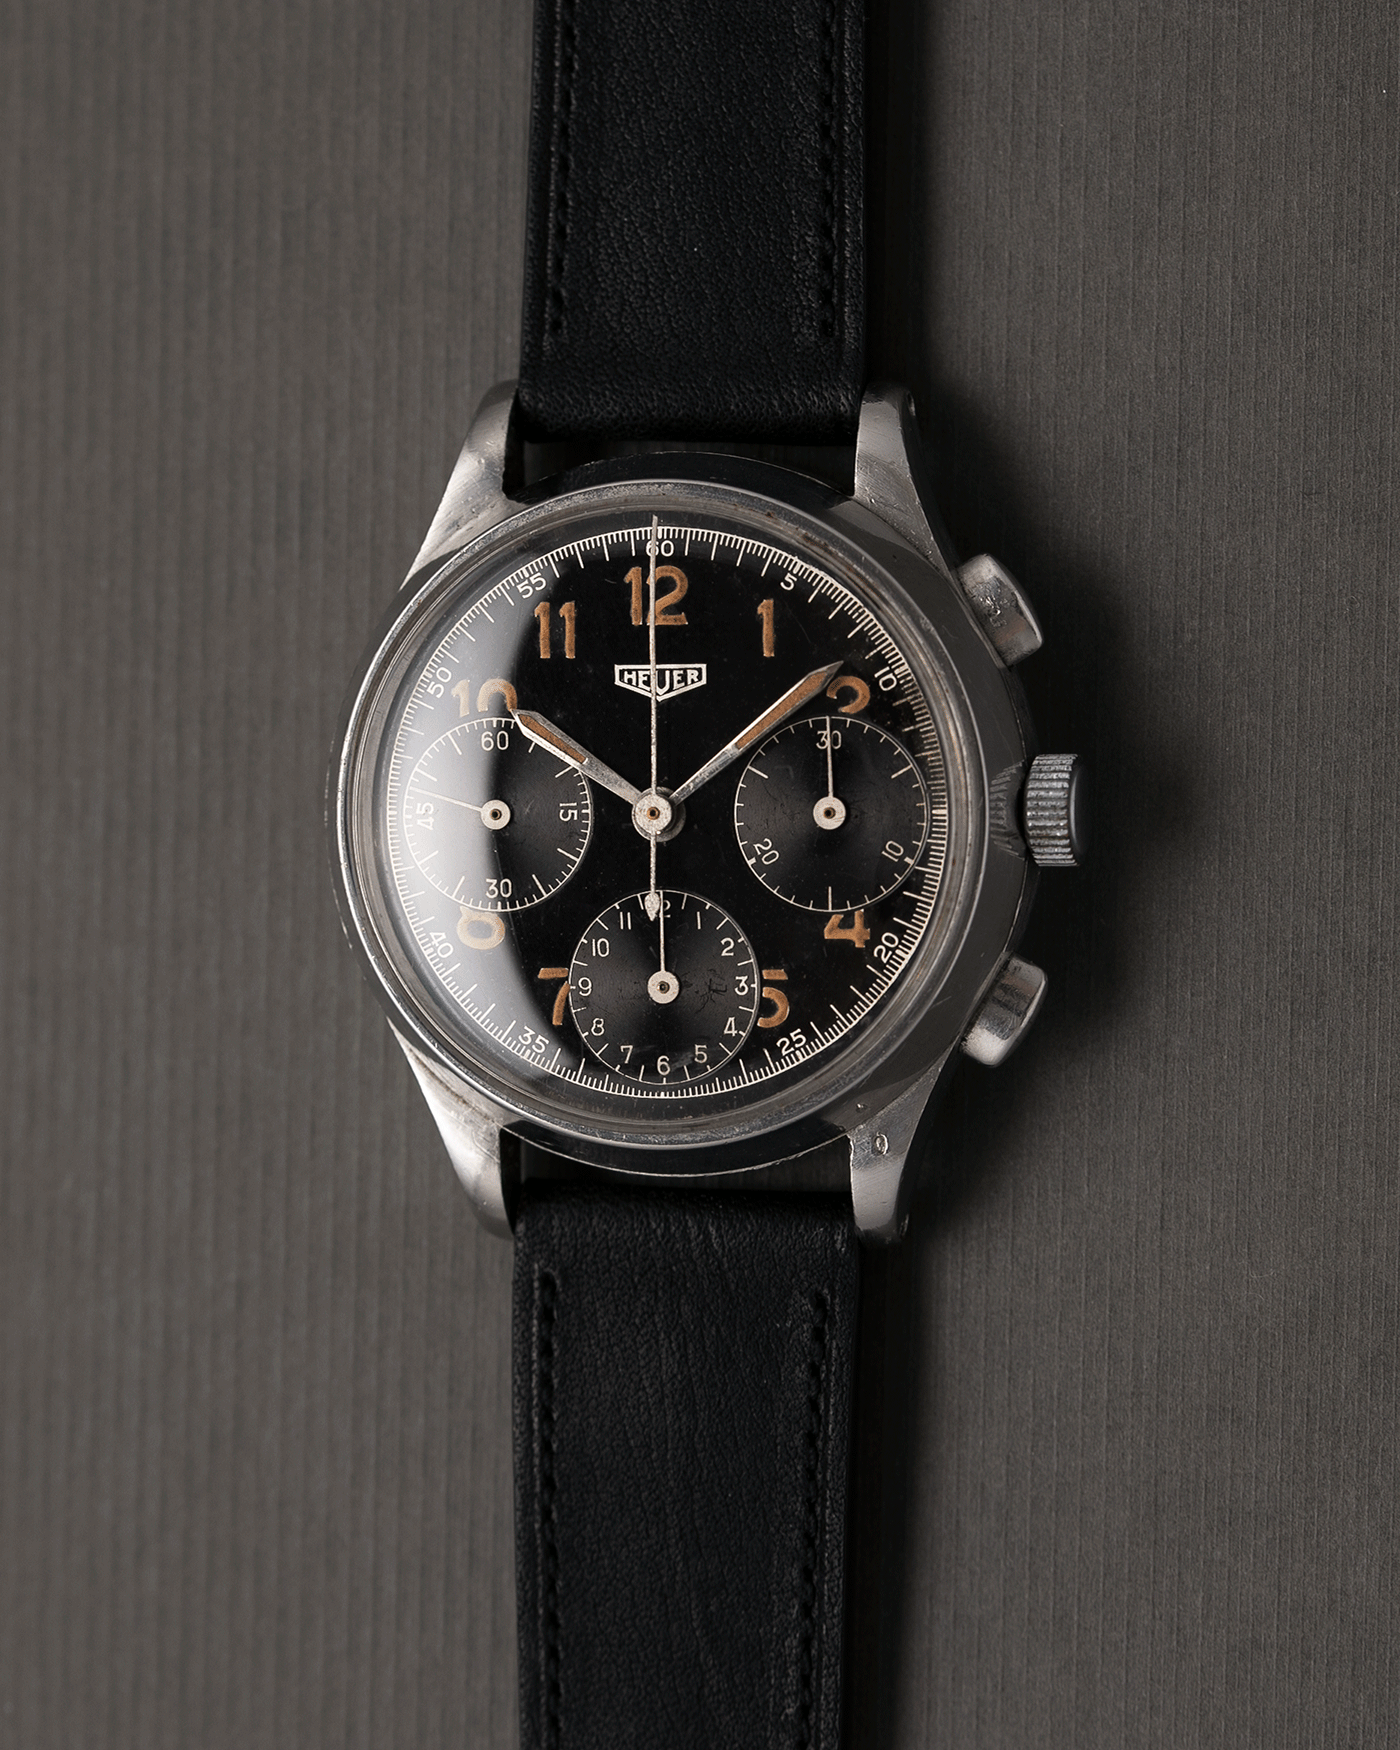 Brand: Heuer Year: 1940’s Reference Number: 345 Material: Stainless Steel Movement: Valjoux 71 Case Diameter: 36mm Lug Width: 18mm Bracelet/Strap: Nostime Black Calf Brand: Heuer Year: 1940’s Reference Number: 345 Material: Stainless Steel Movement: Valjoux 71 Case Diameter: 36mm Lug Width: 18mm Bracelet/Strap: Nostime Black Calf